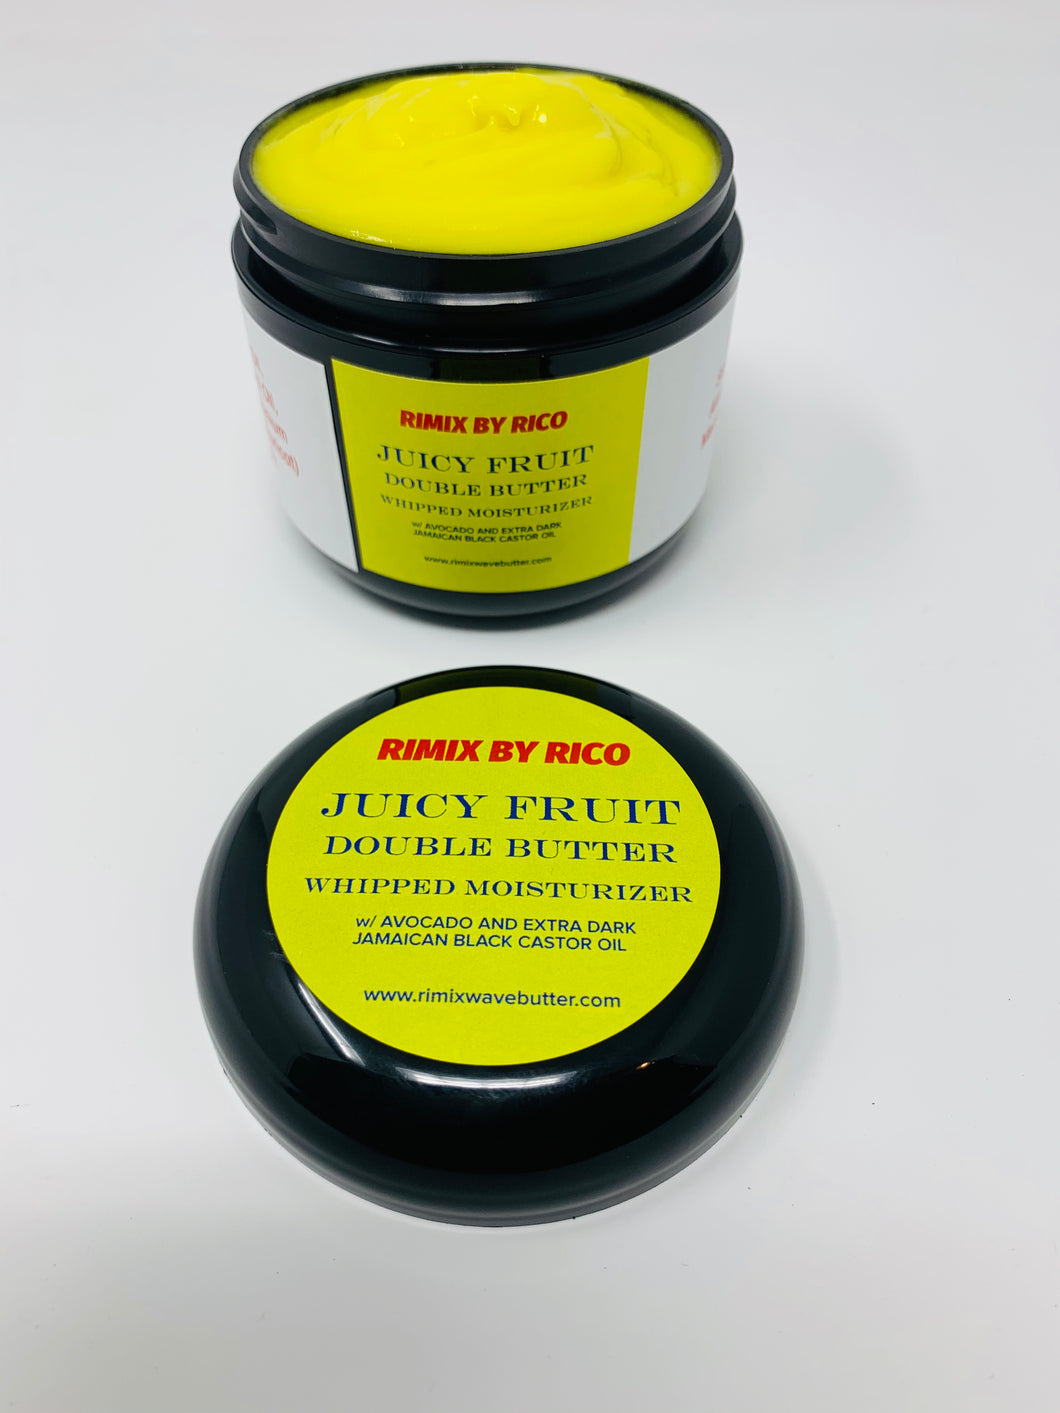 Rimix Juicy Fruit Double Butter Whipped Moisturizer w/ Avocado and Extra Dark Jamaican Black Castor Oil 4oz